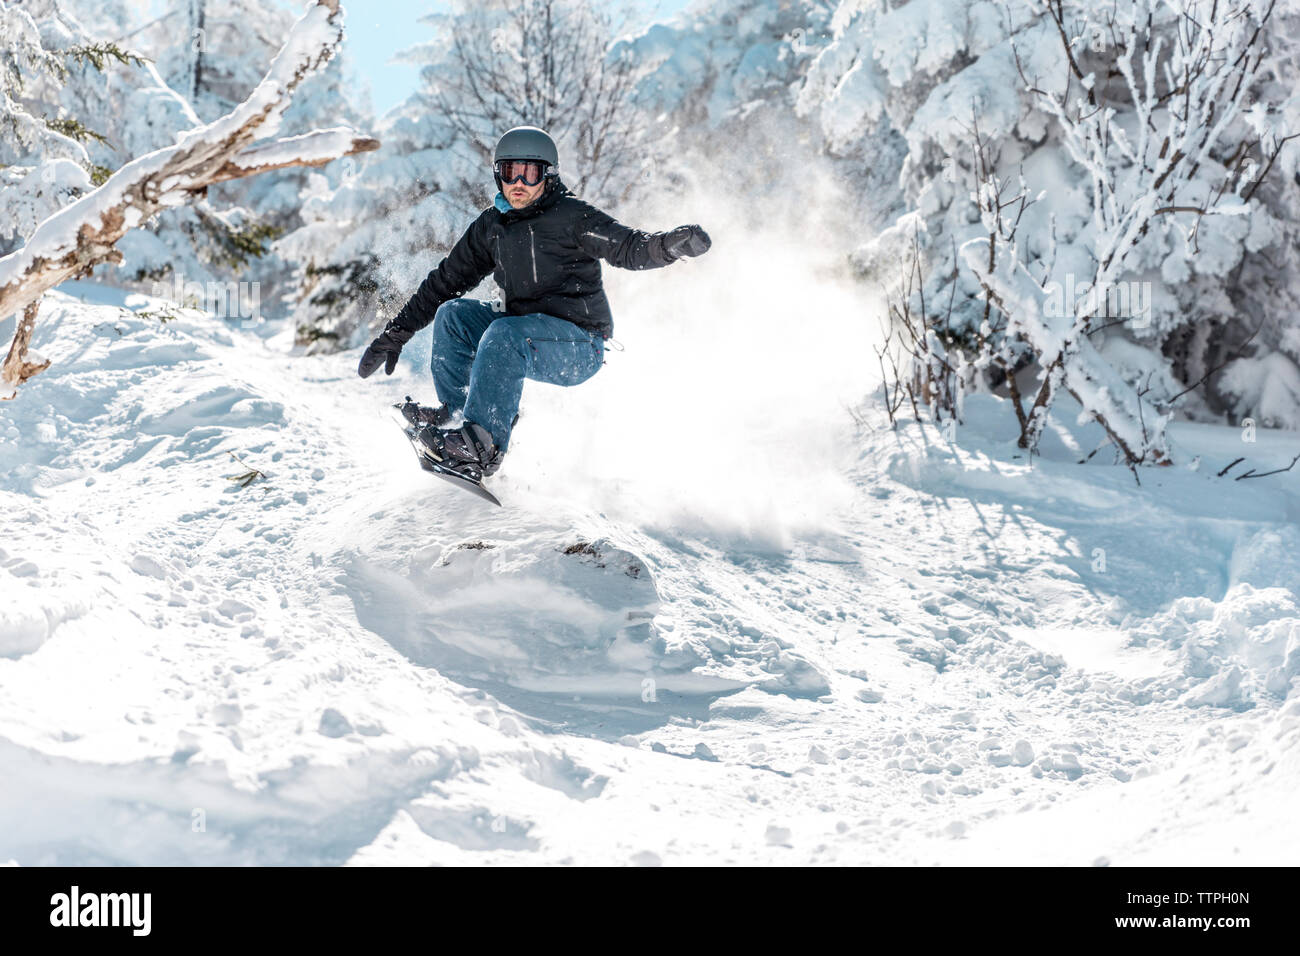 Full length of man snowboarding on snow against trees during winter Stock Photo